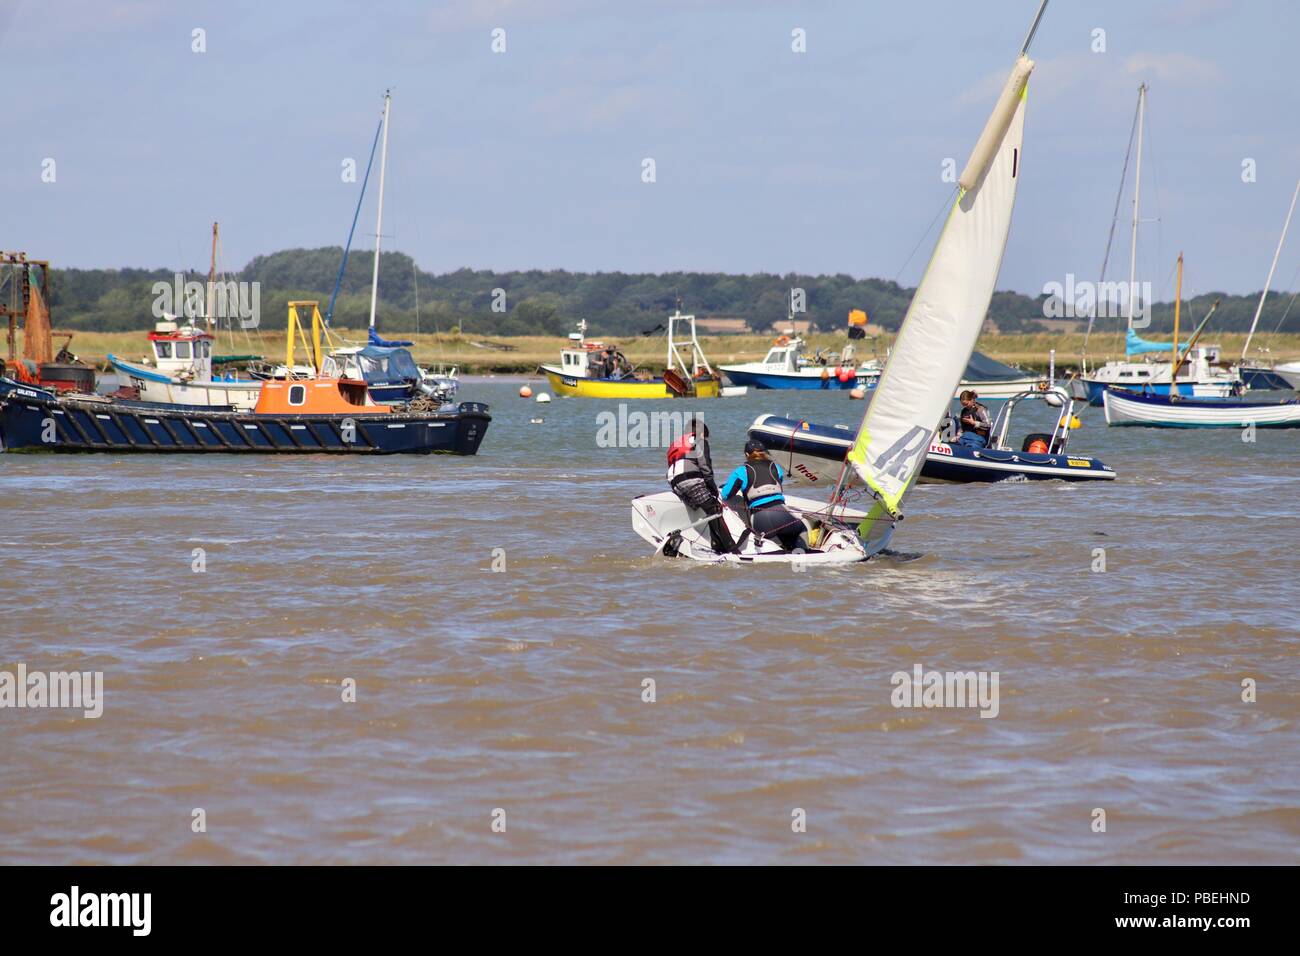 Suffolk, UK. 28th July 2018. UK Weather: Dinghy sailors contending with strong gusty winds this morning on the River Deben at Felixstowe Ferry, Suffolk. Credit: Angela Chalmers/Alamy Live News Stock Photo